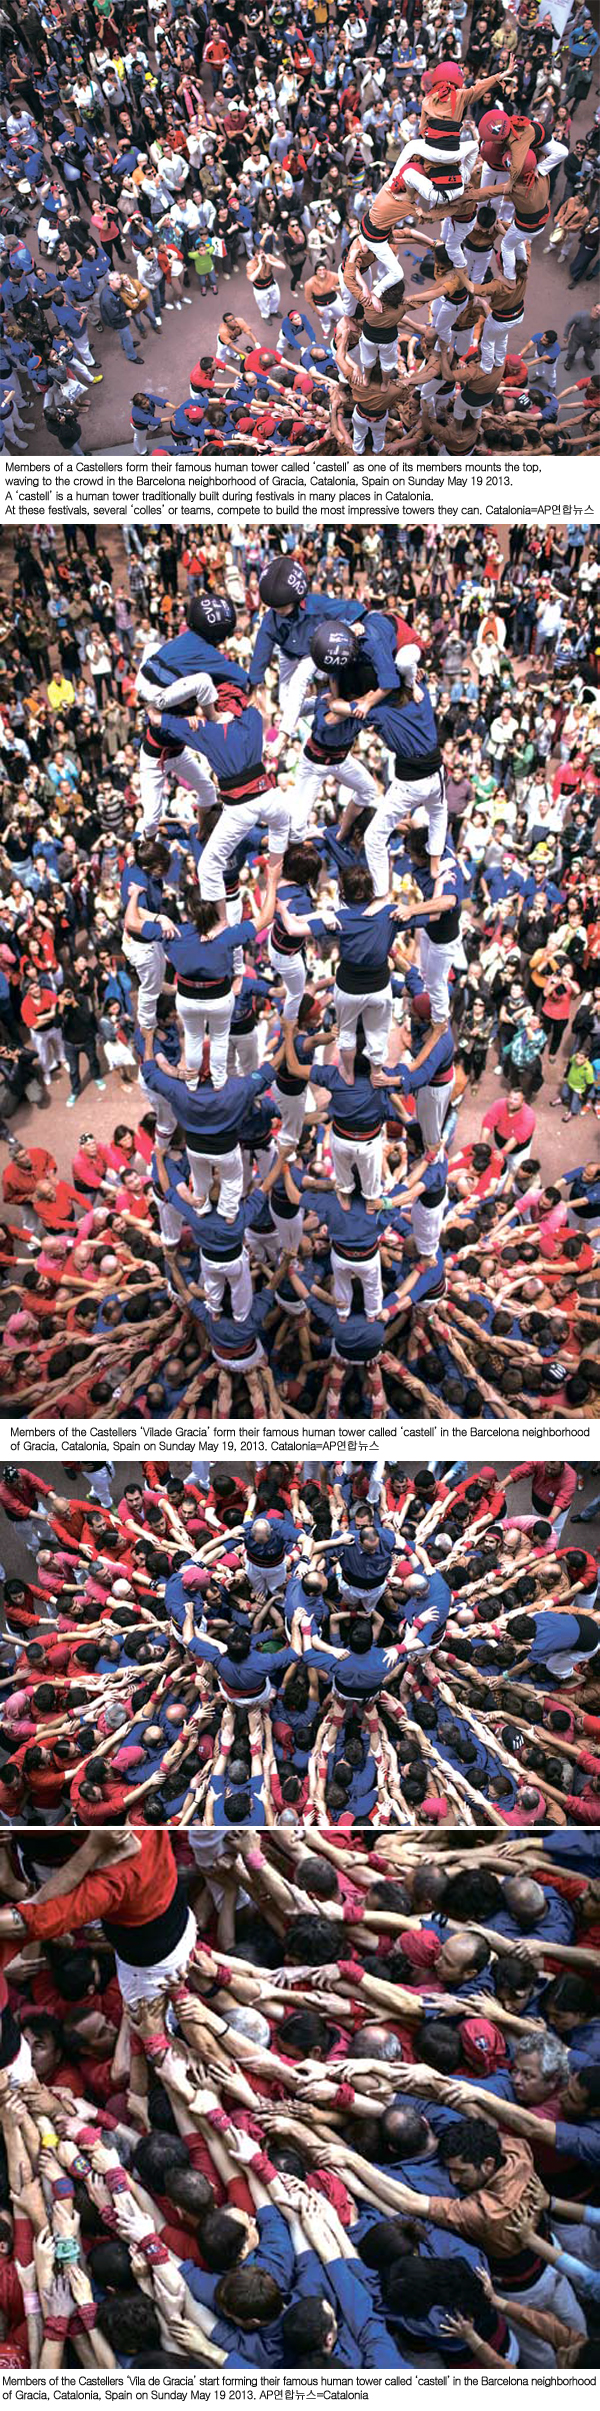 [Around the world]Let’s make a human tower!